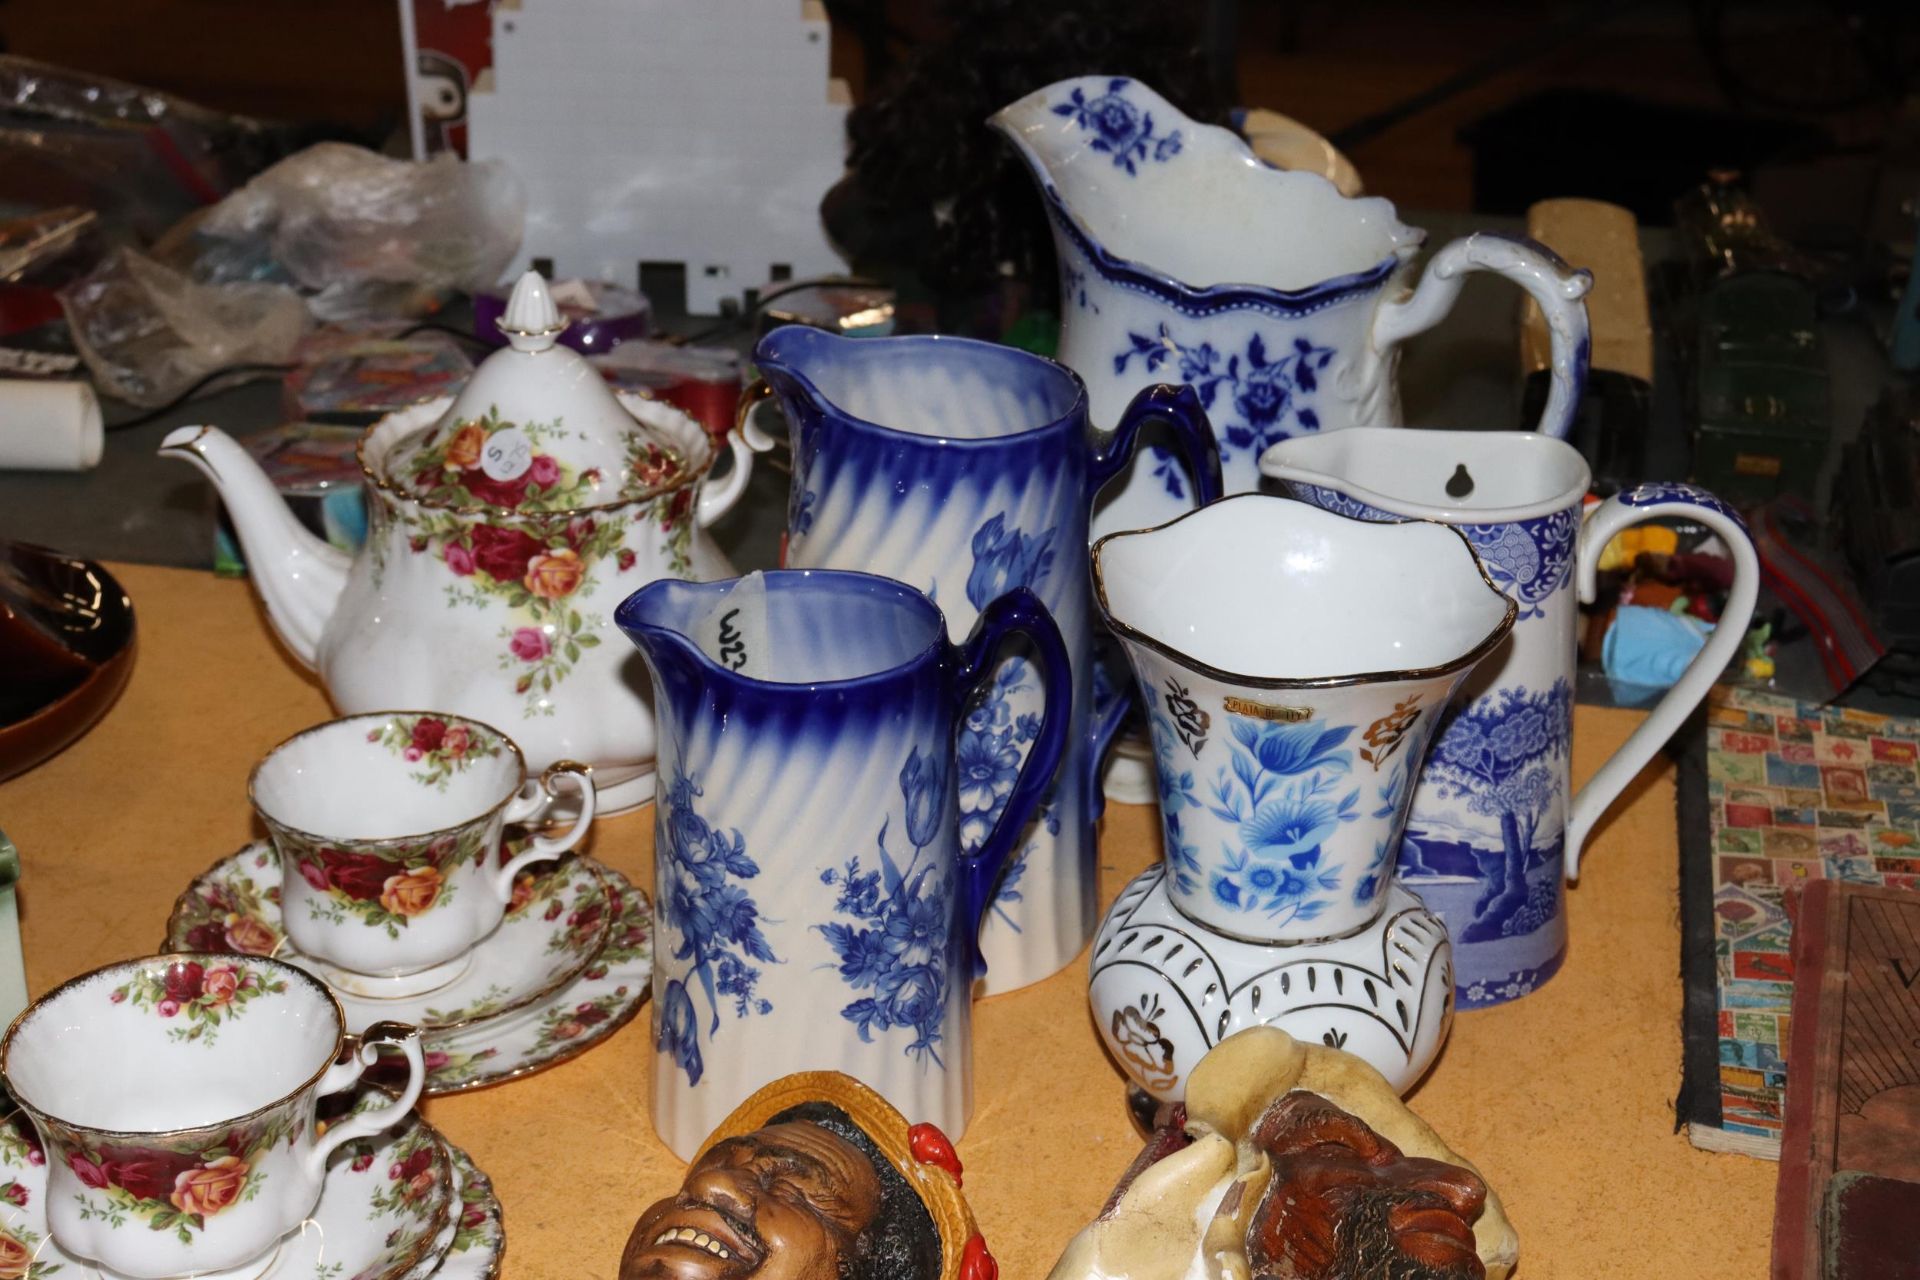 A COLLECTION OF VINTAGE BLUE AND WHITE JUGS PLUS A VASE - 5 IN TOTAL